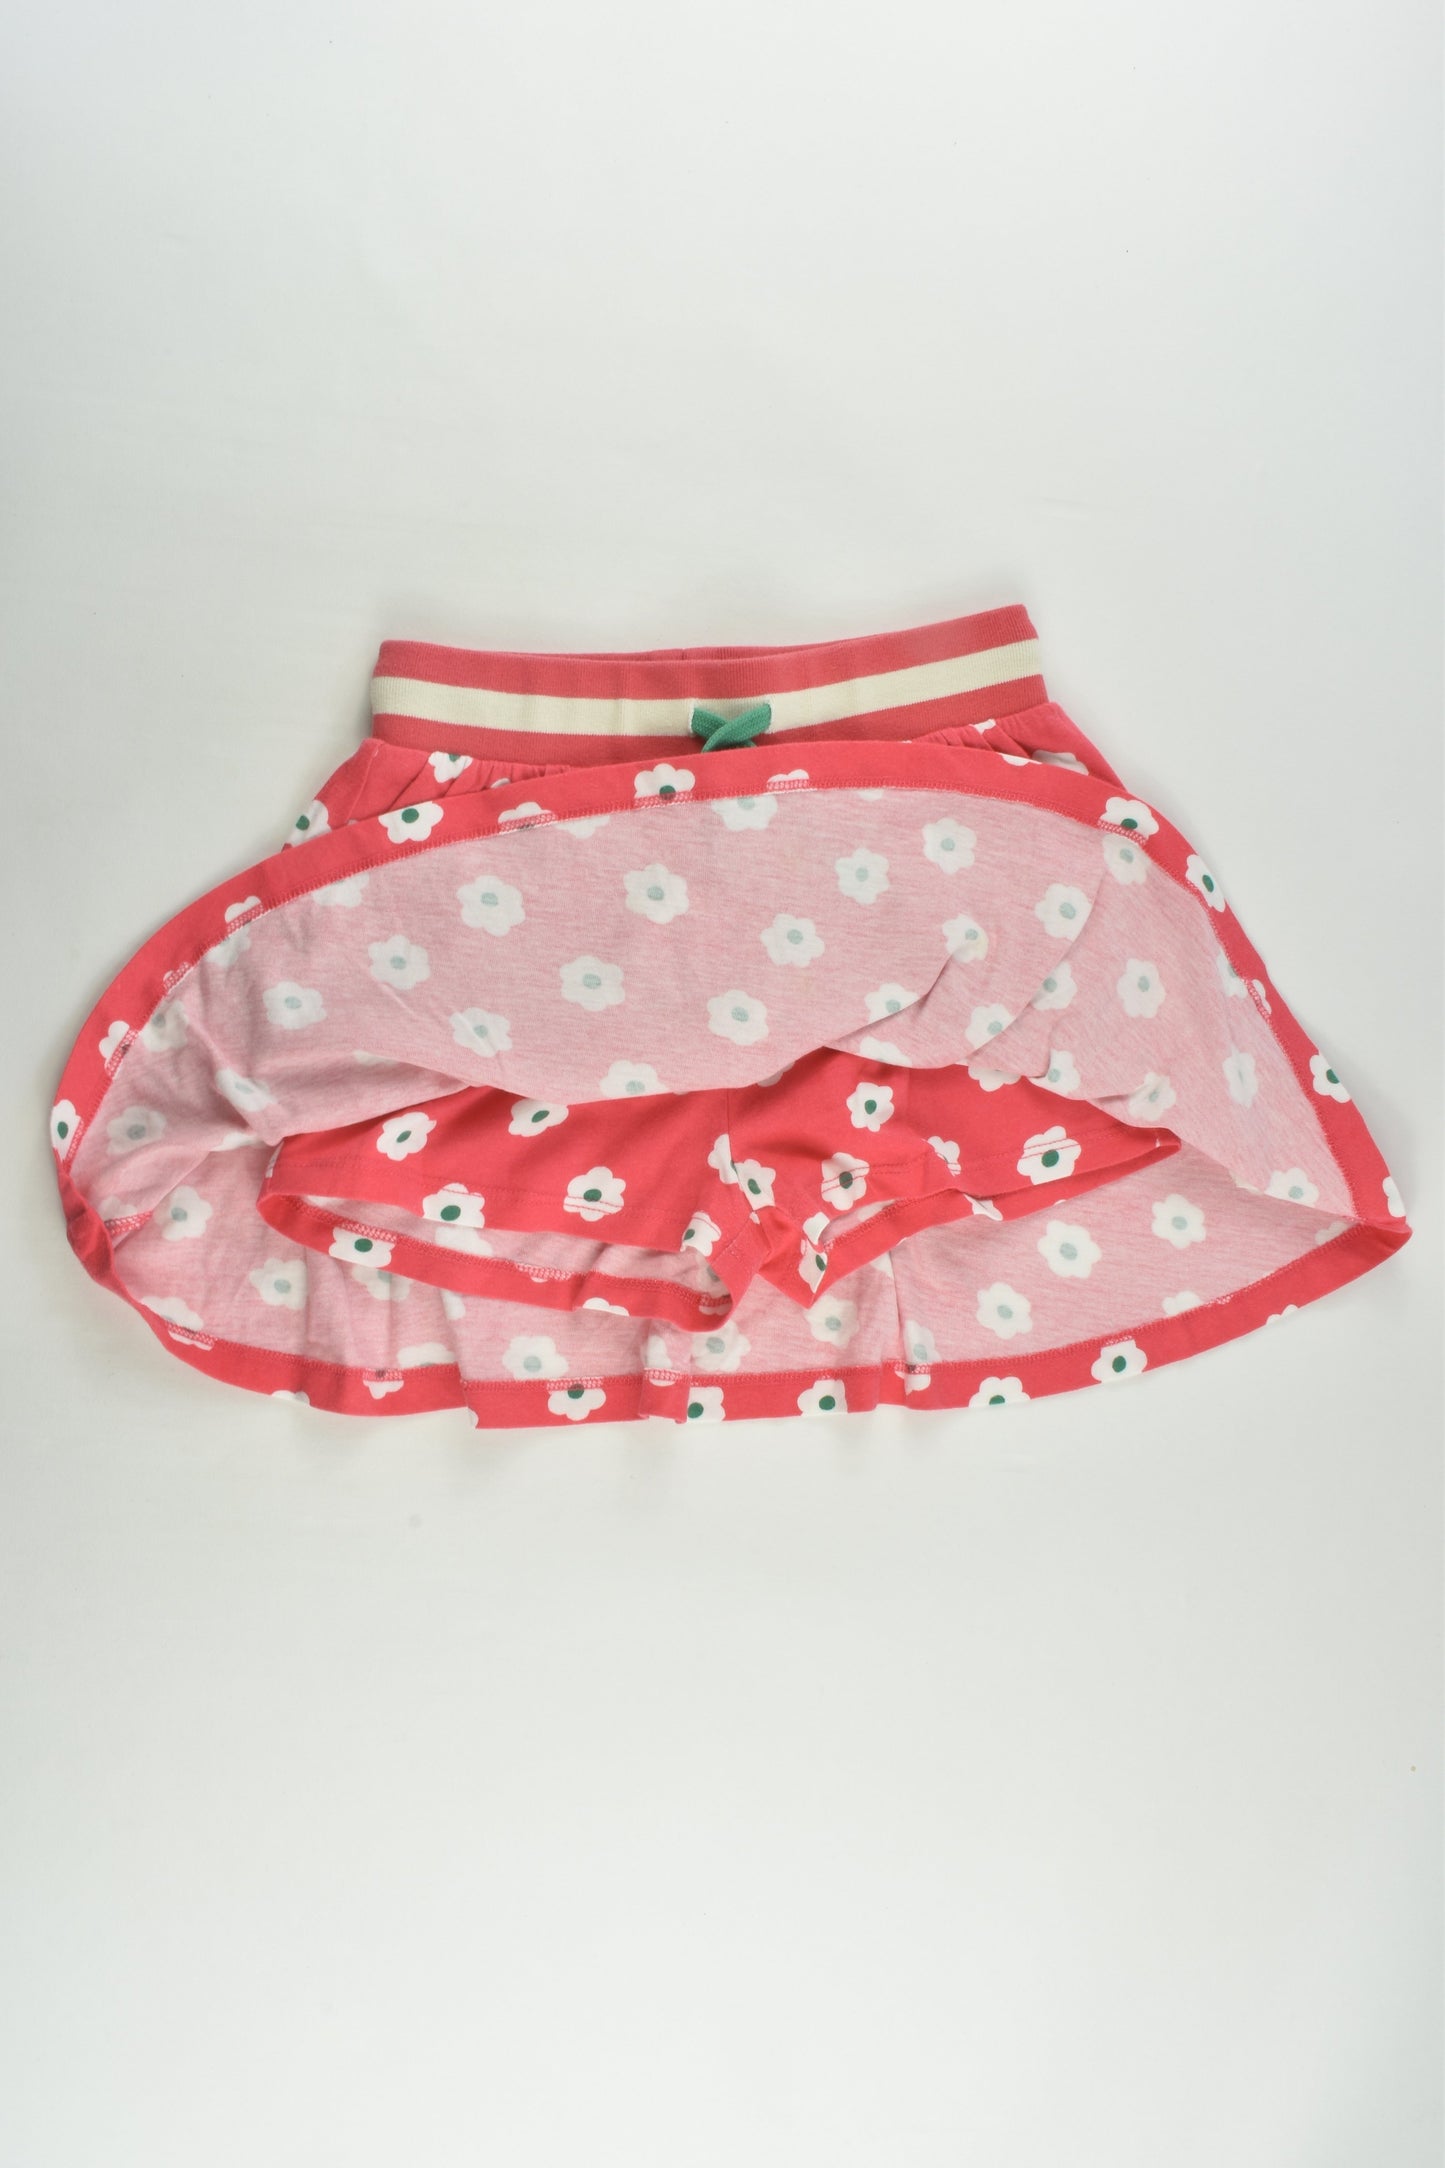 Mini Boden Size 9-10 (140 cm) Floral Skirt with Shorts Underneath